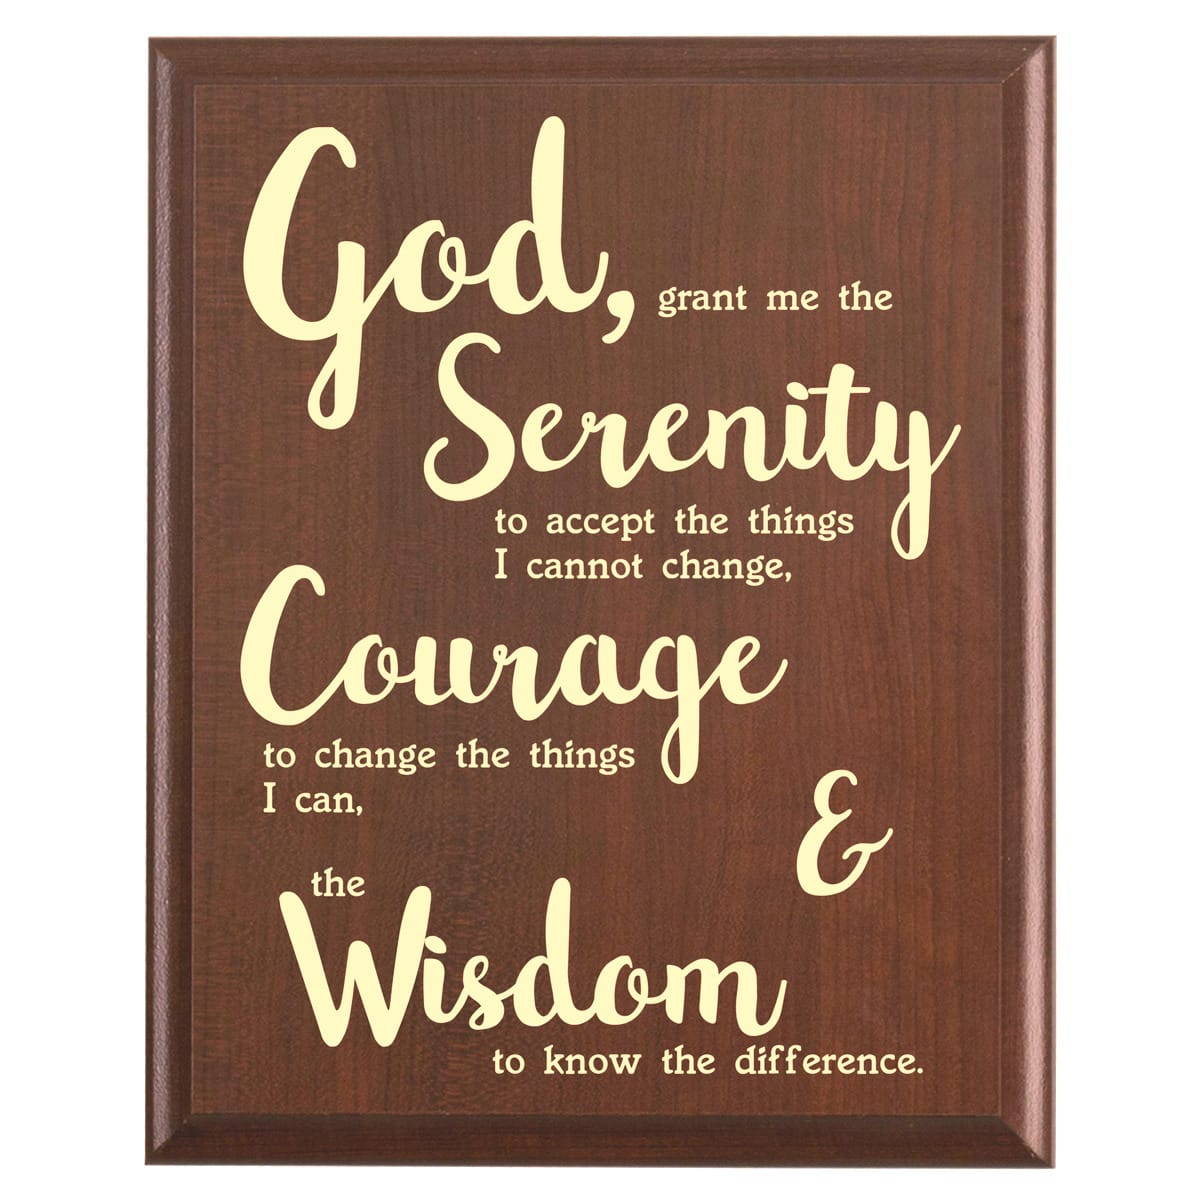 Plaque photo: Serenity Prayer Plaque design with free personalization. Wood style finish with customized text.